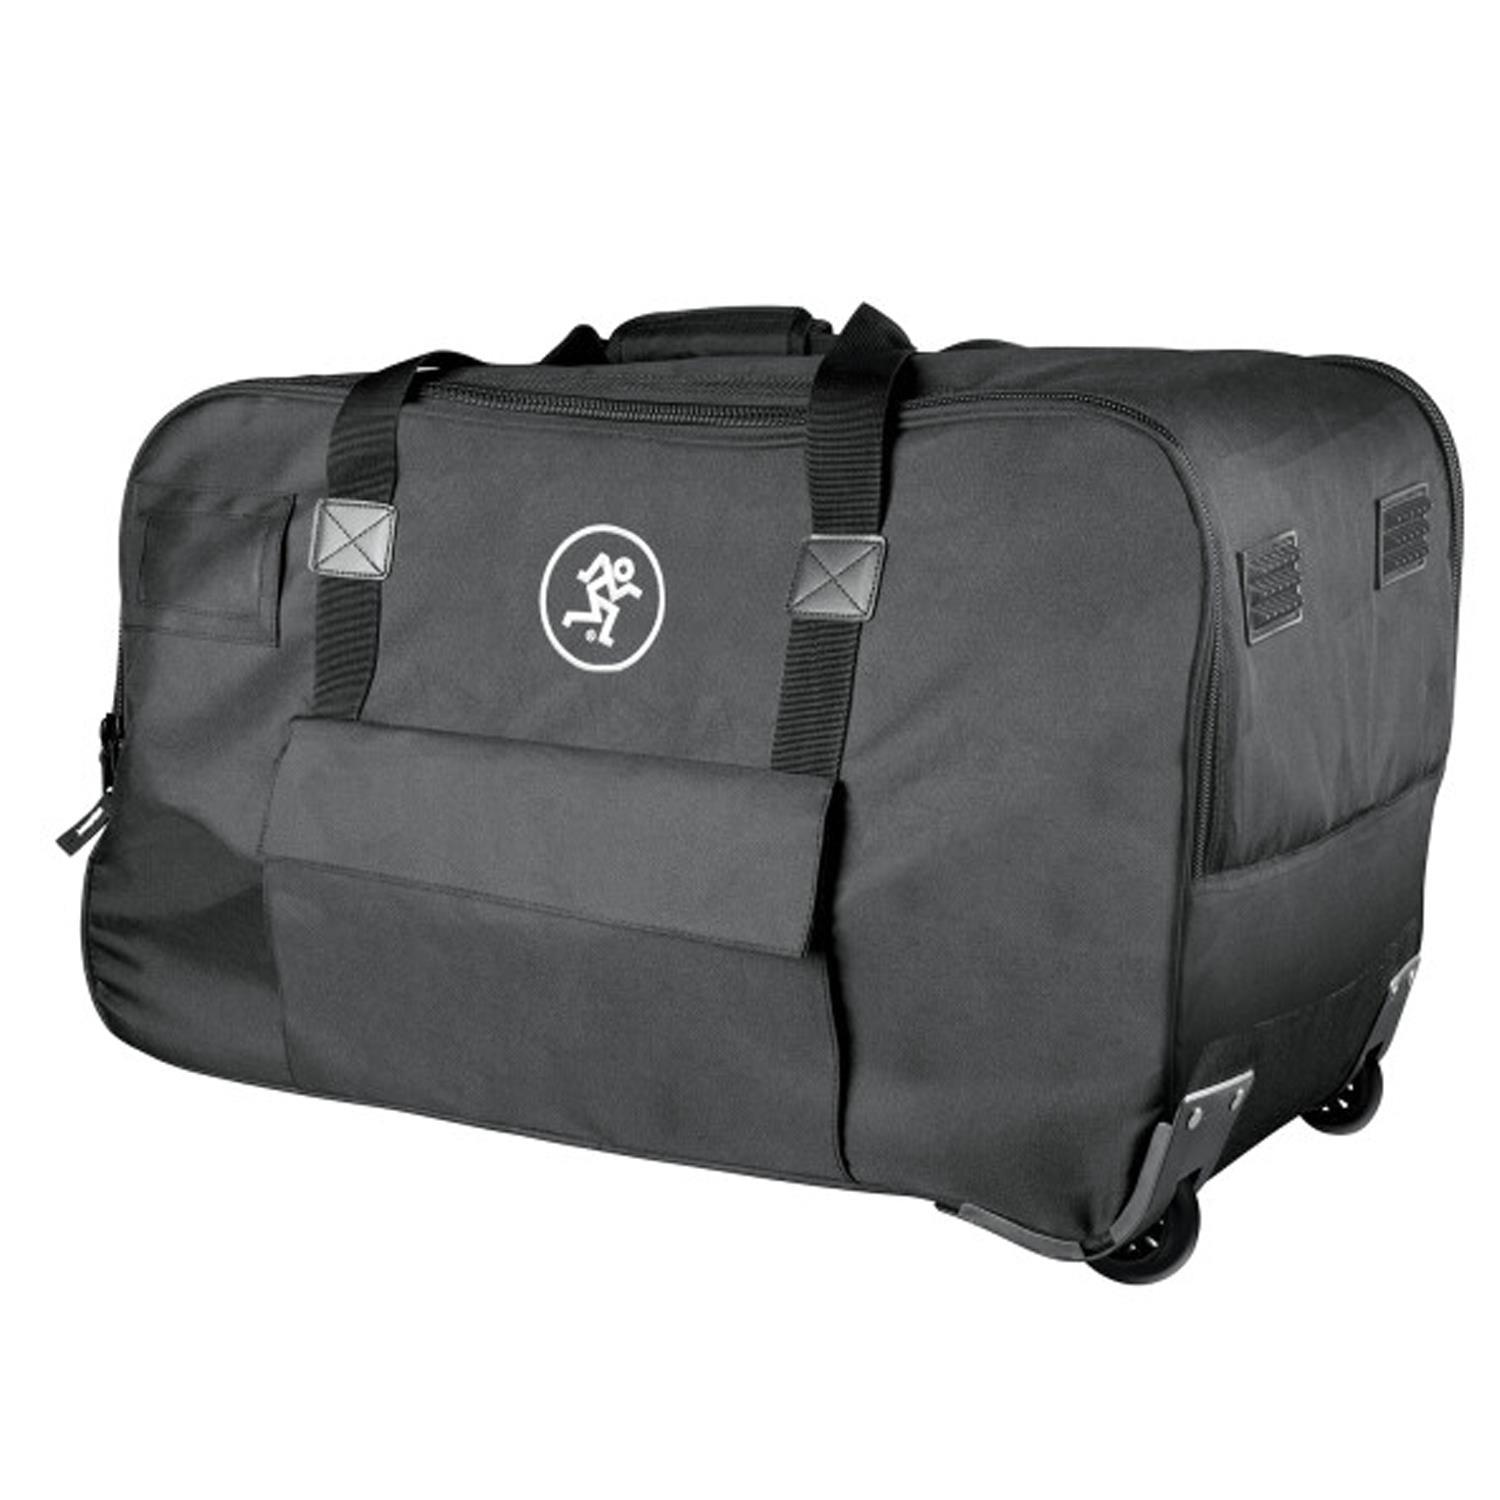 Mackie Padded Rolling Carry Bag for Thump 12" Models Thump212, Thump212XT, Thump12A, Thump12BST - DY Pro Audio